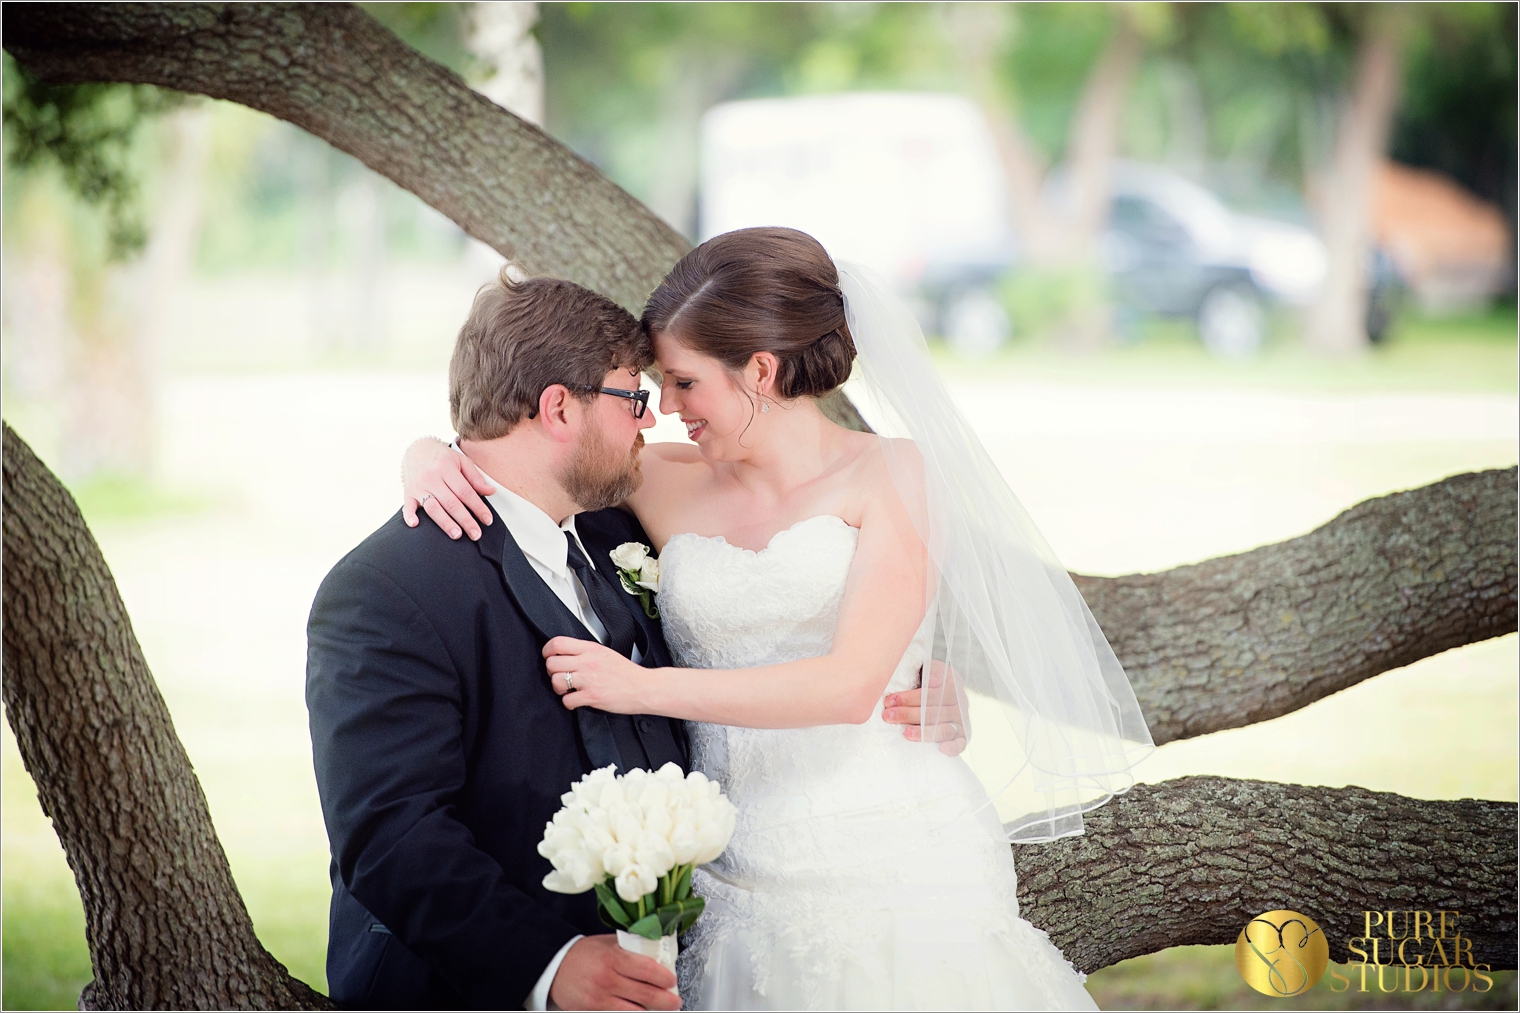 Pure Sugar Studios_St augustine wedding Photography_fountain of youth__0339.jpg